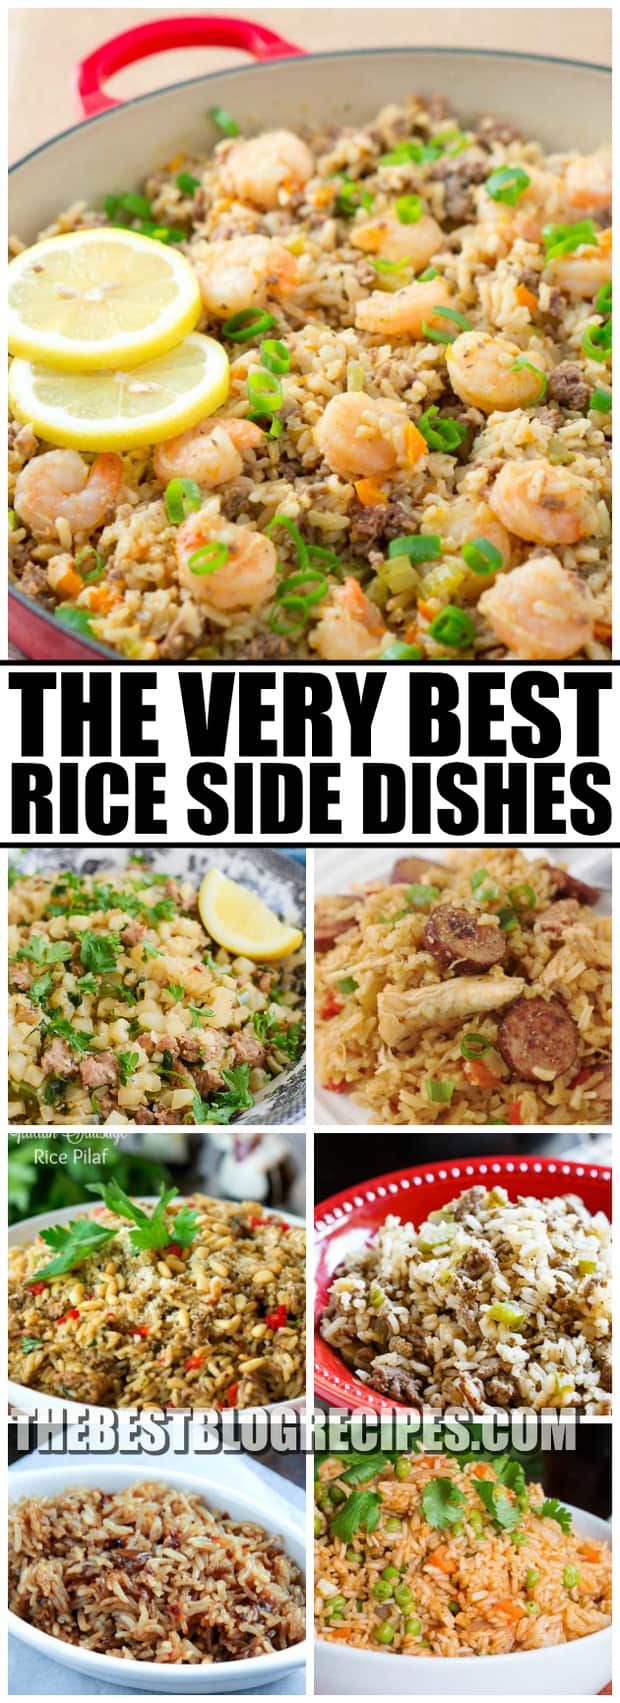 The Best Rice Side Dishes